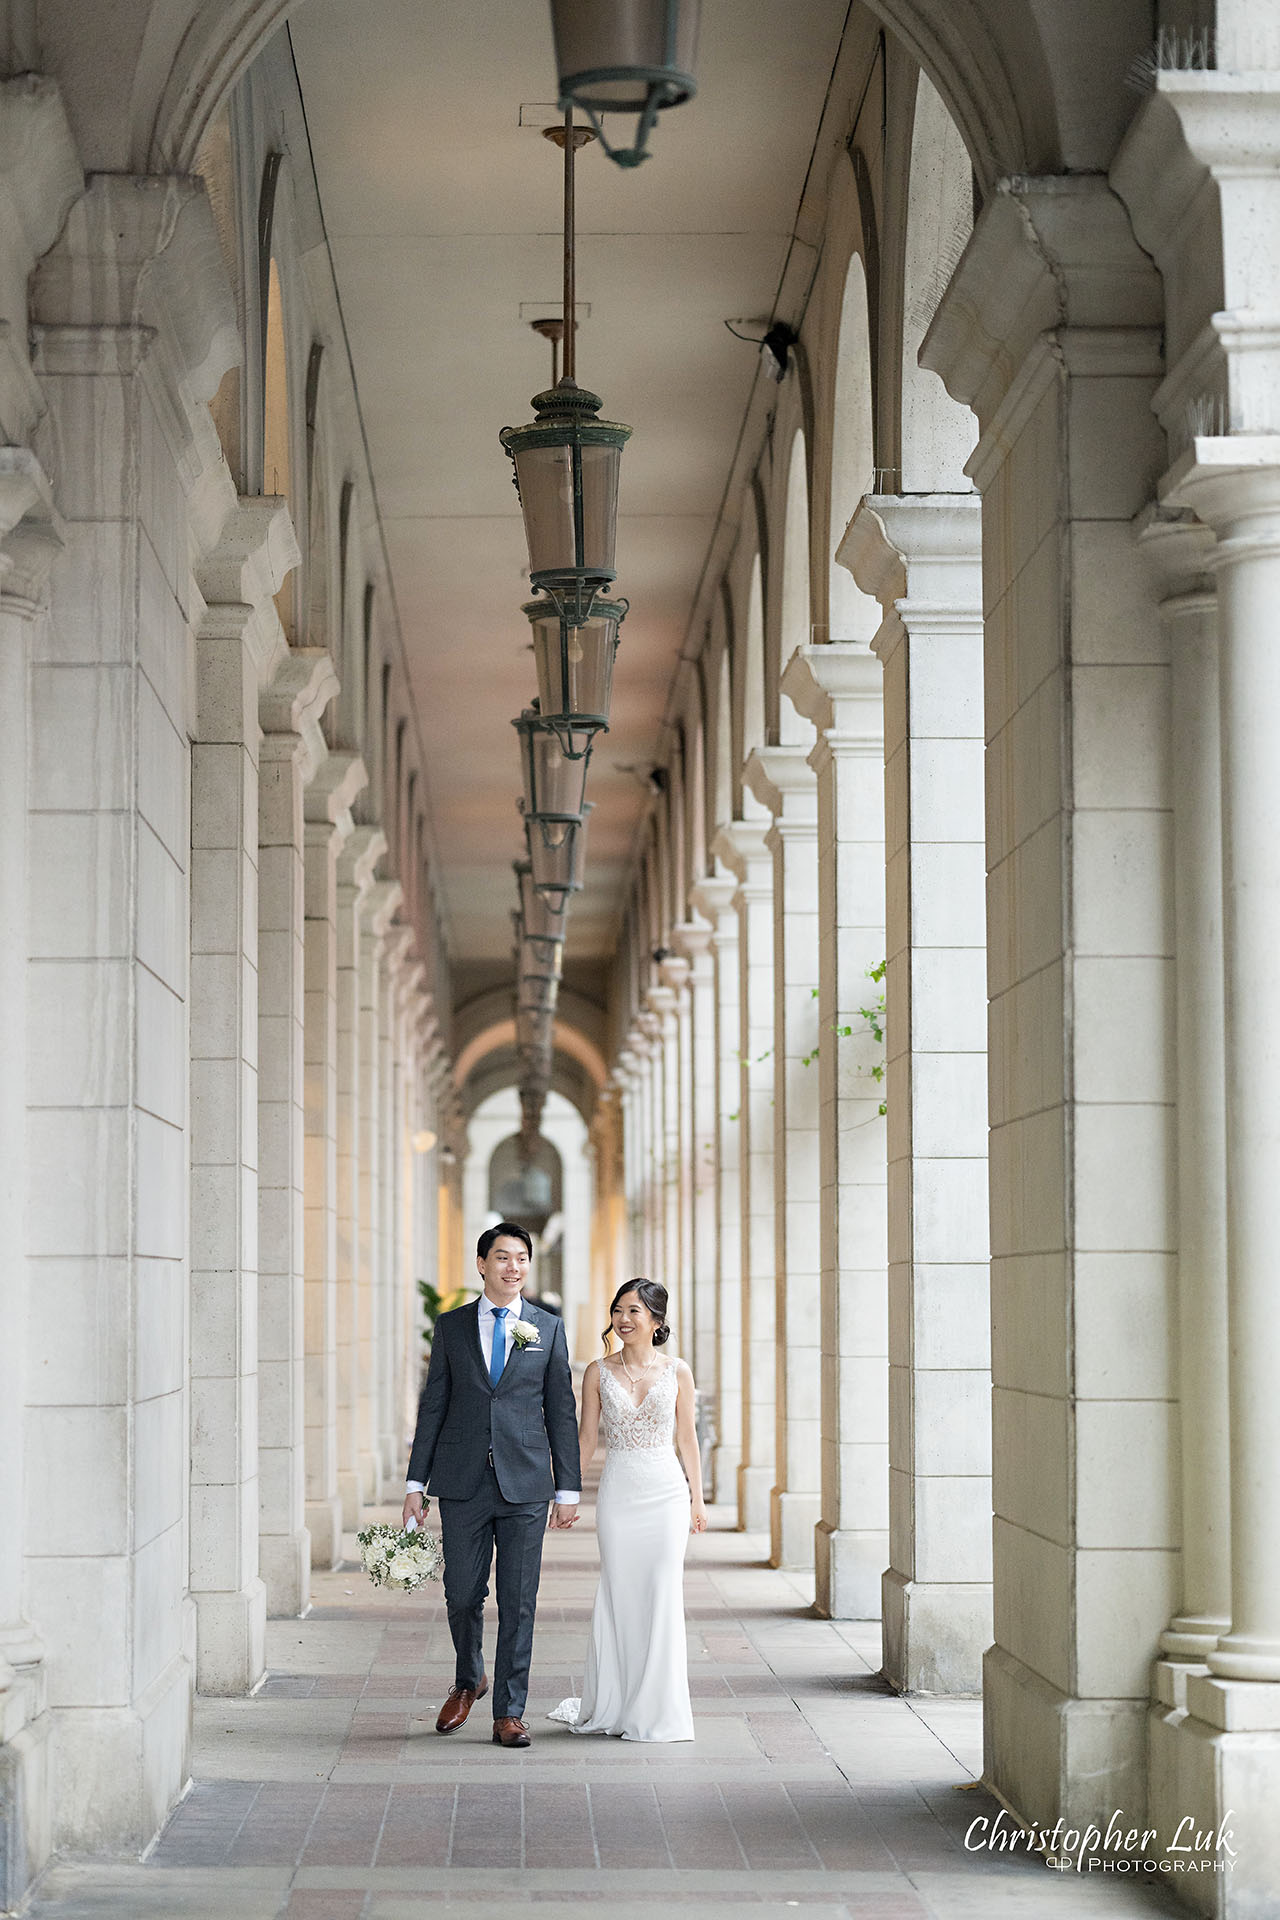 Bride Groom Wedding Together Candid Natural Organic Photojournalistic Streetscape Downtown Toronto Esplanade Architecture Majestic Royalty Holding Hands Walking Together Portrait